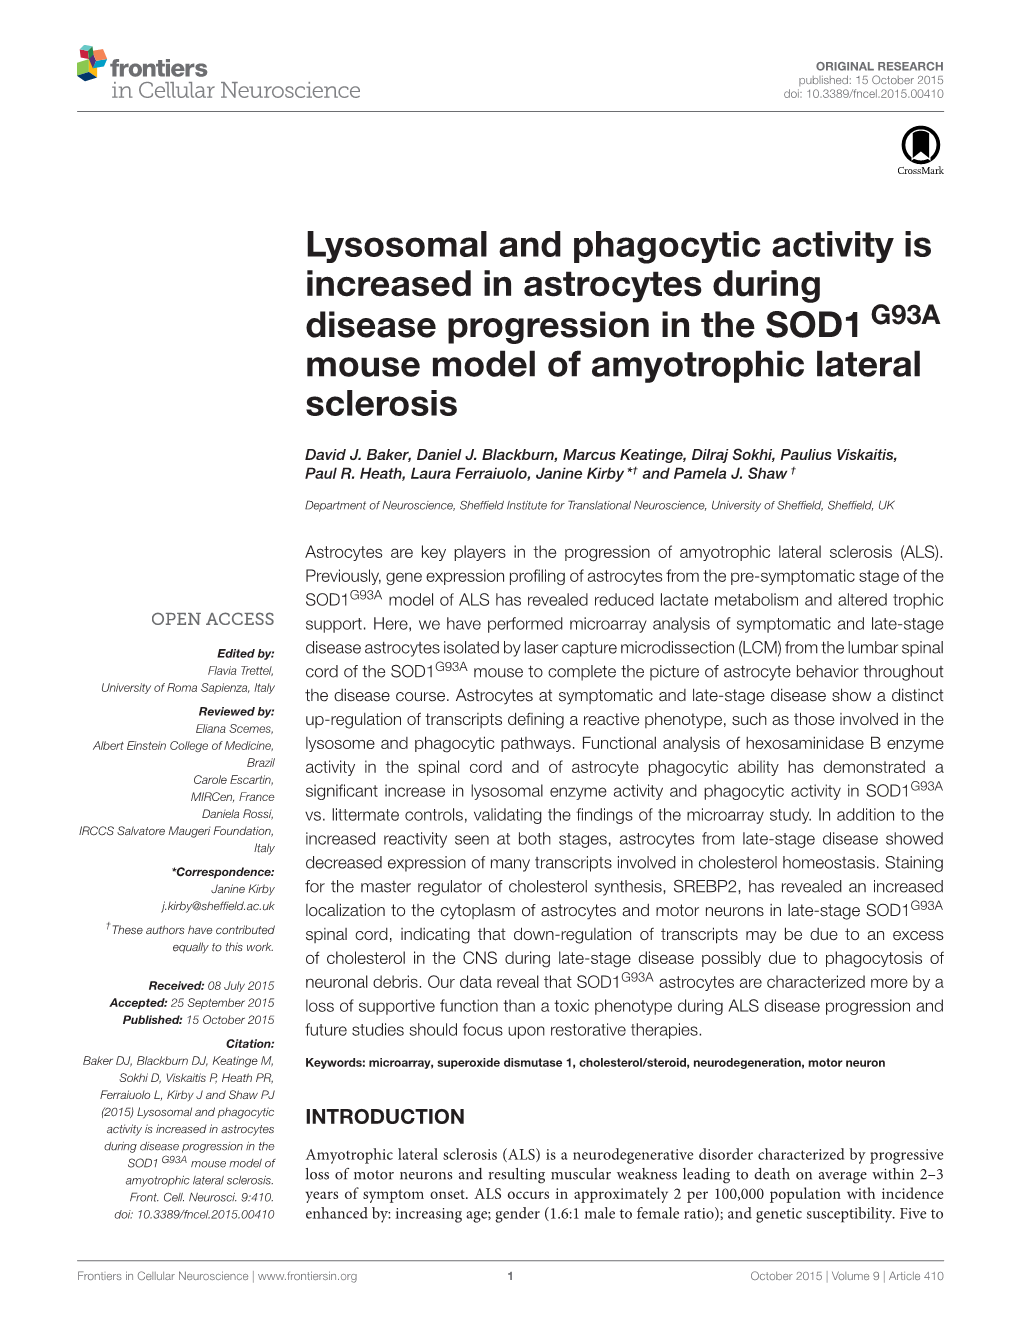 Lysosomal and Phagocytic Activity Is Increased in Astrocytes During Disease Progression in the SOD1 G93A Mouse Model of Amyotrophic Lateral Sclerosis